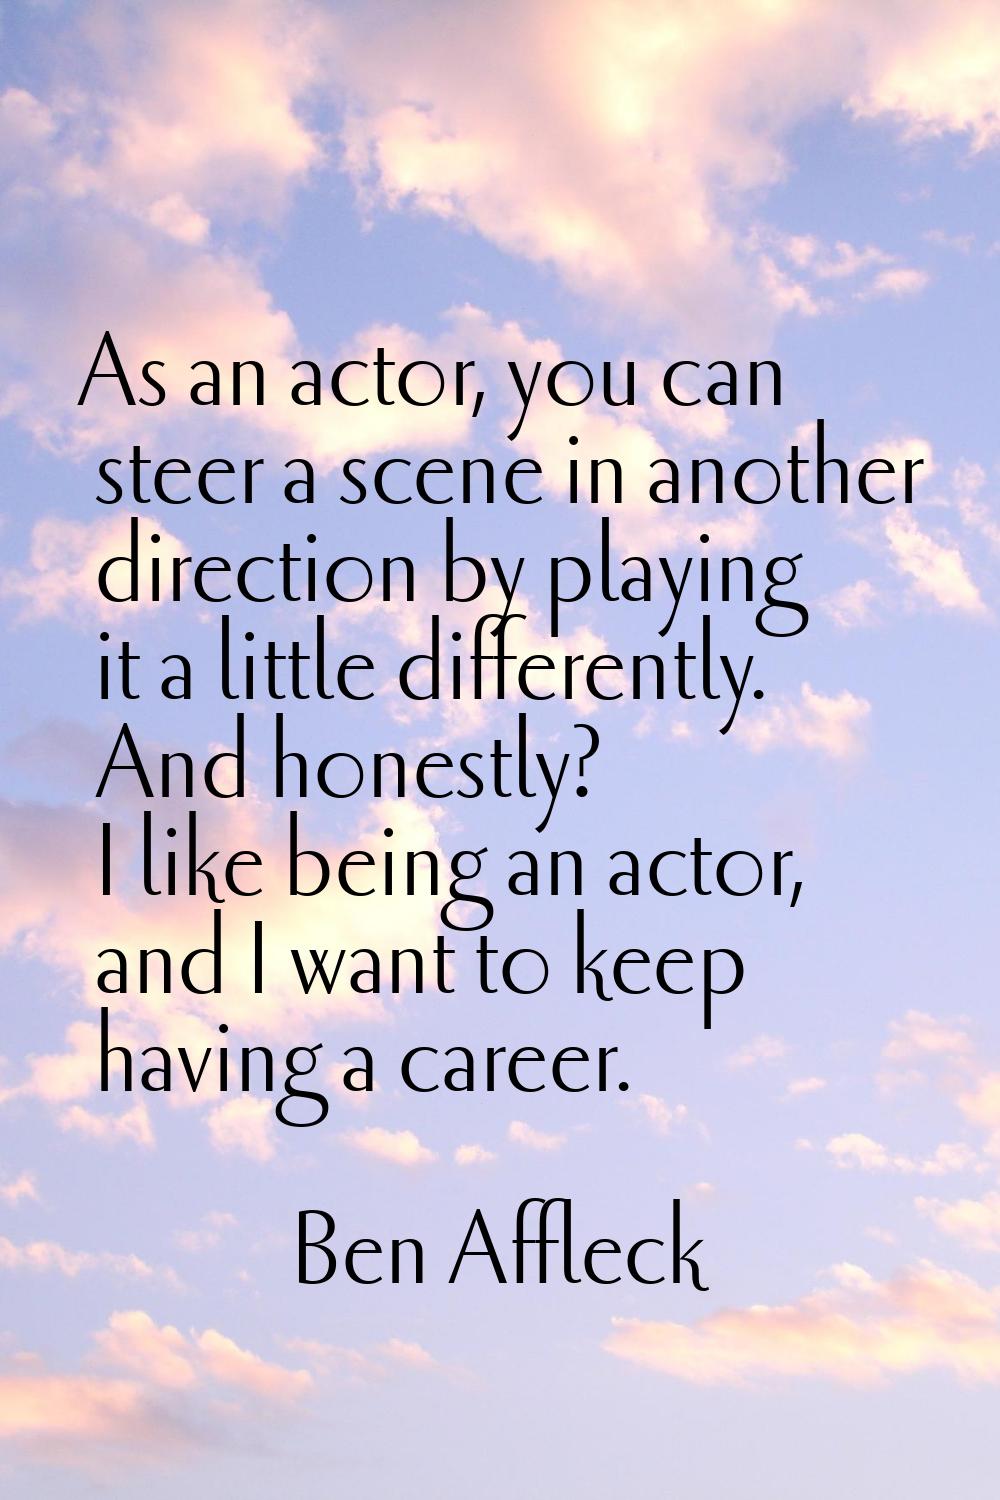 As an actor, you can steer a scene in another direction by playing it a little differently. And hon